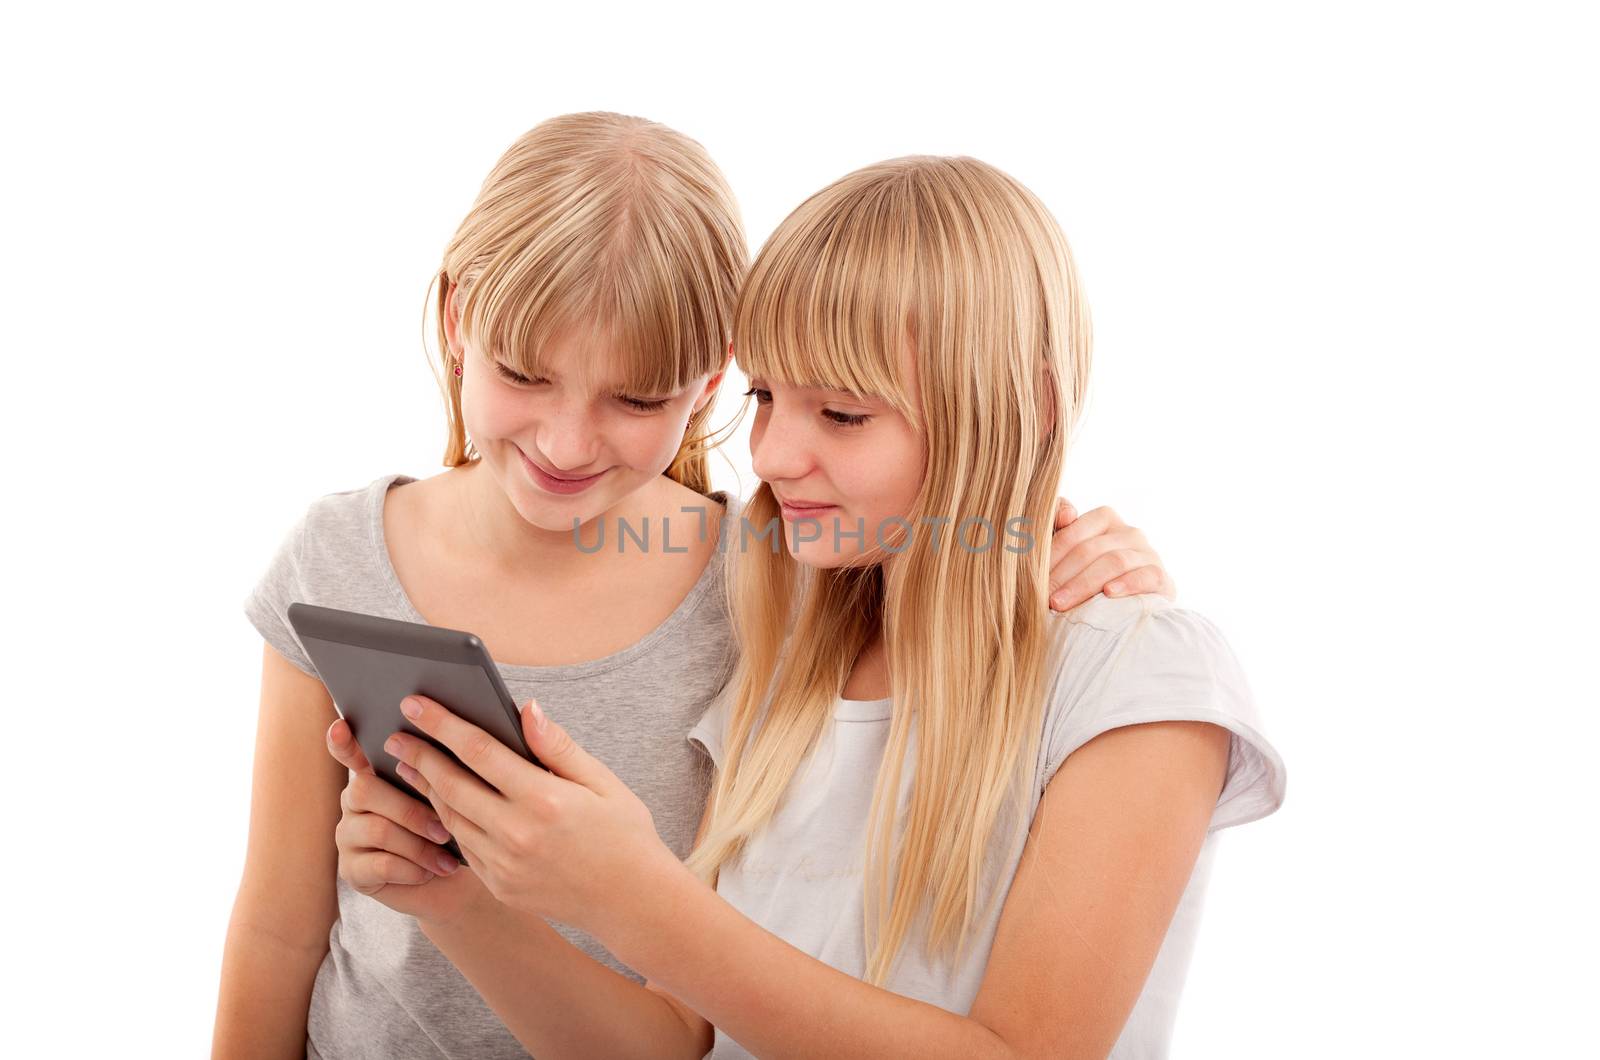 Young females reading something funny in an ebook reader tablet device.